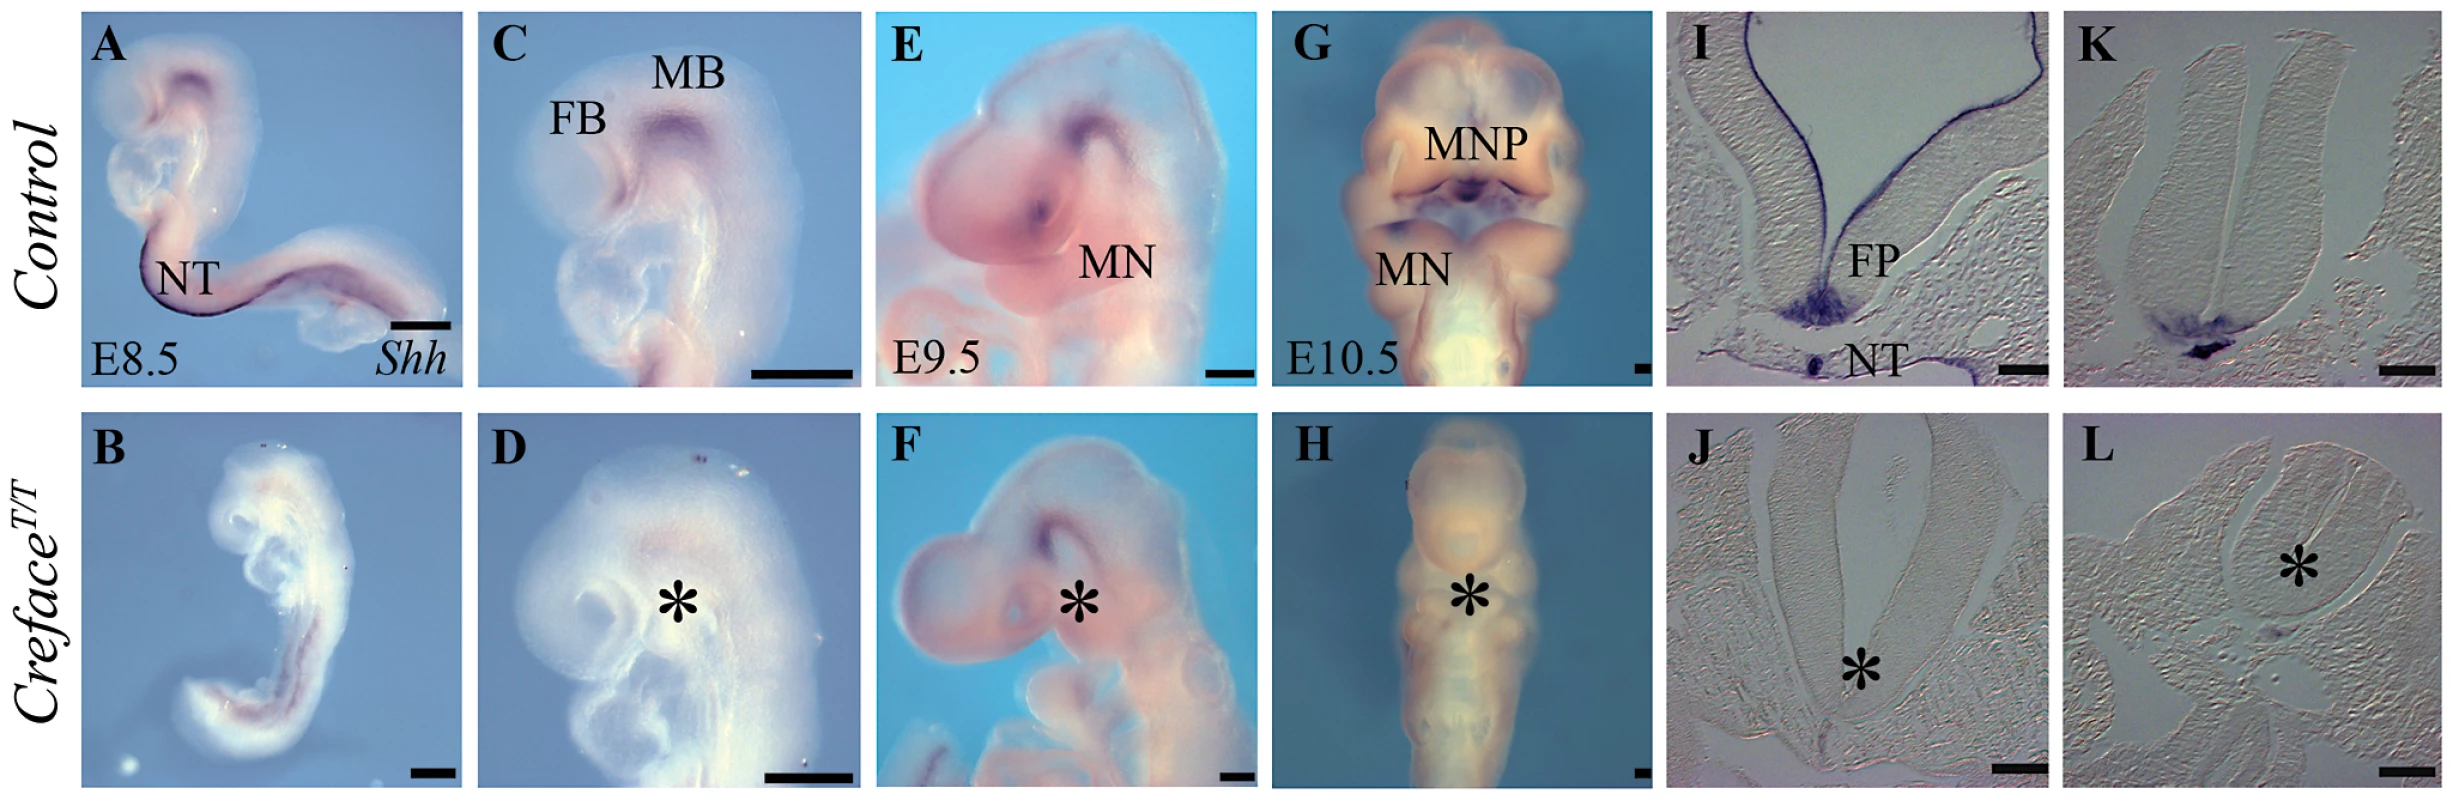 <i>Shh</i> expression is altered in <i>Hhat<sup>Creface/Creface</sup></i> embryos.